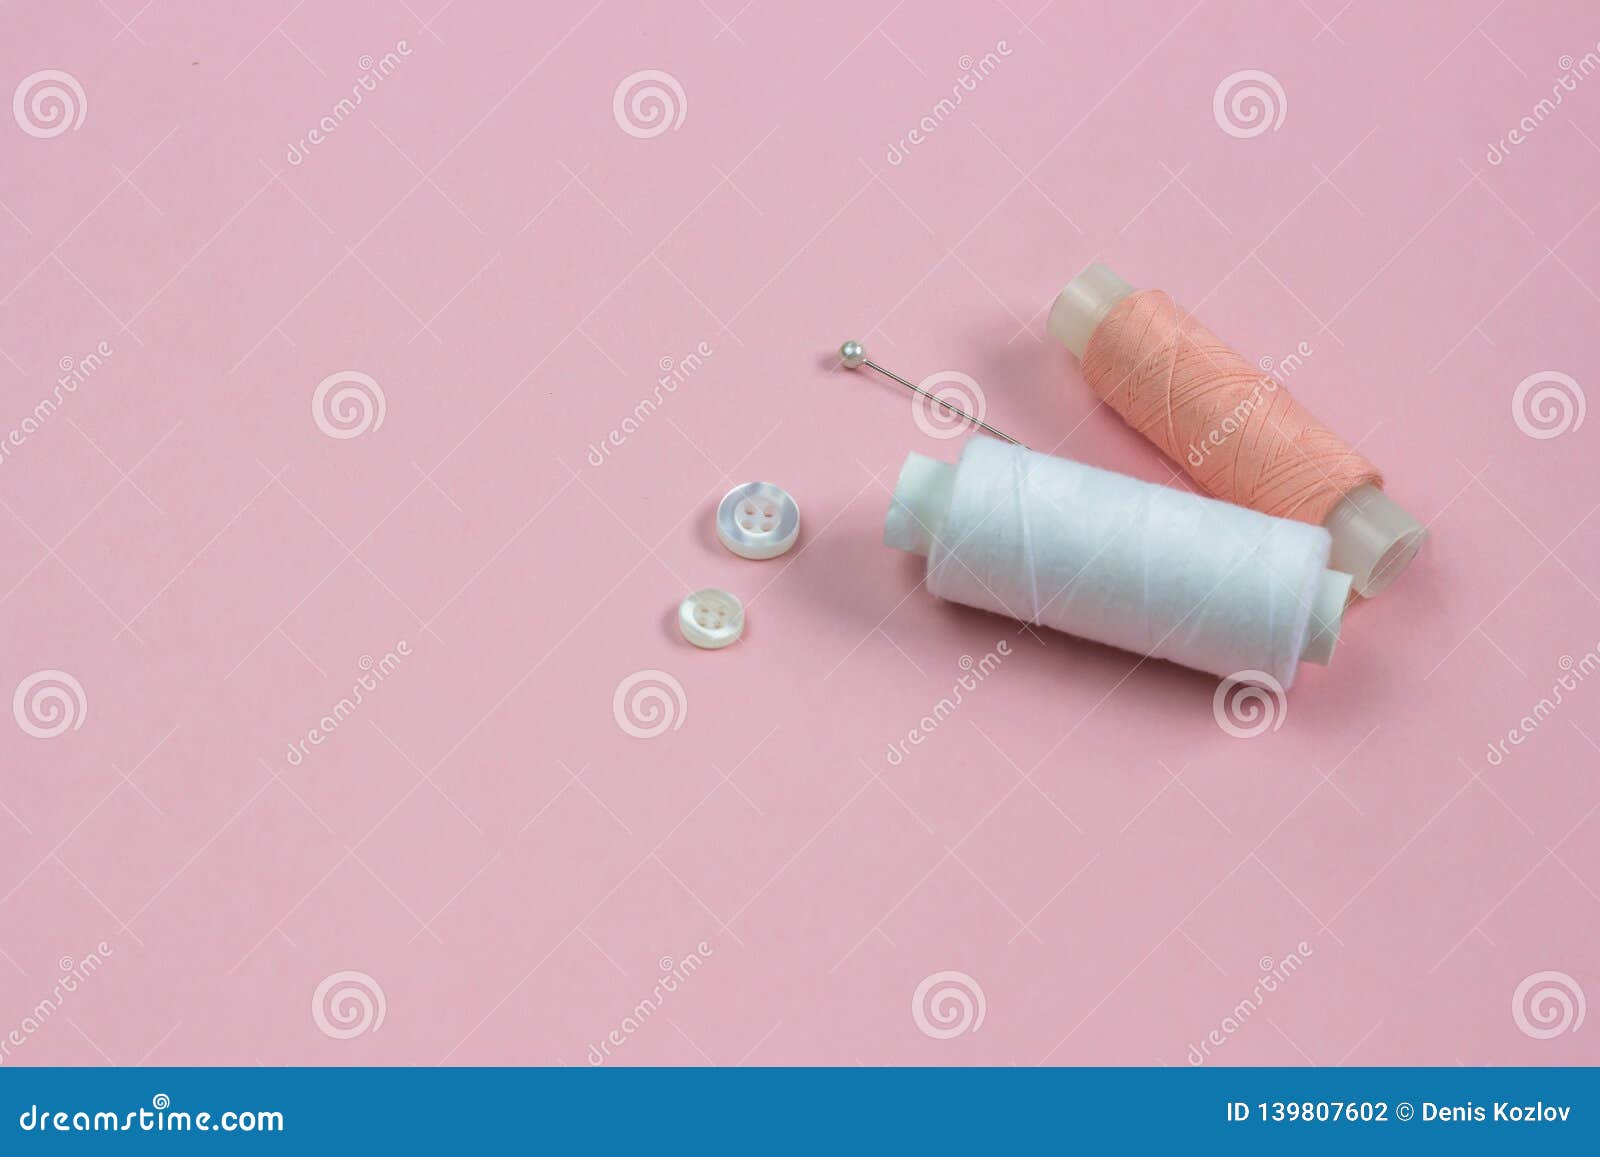 White And Pink Threads, White Buttons And A Needle Stock Photo - Image ...